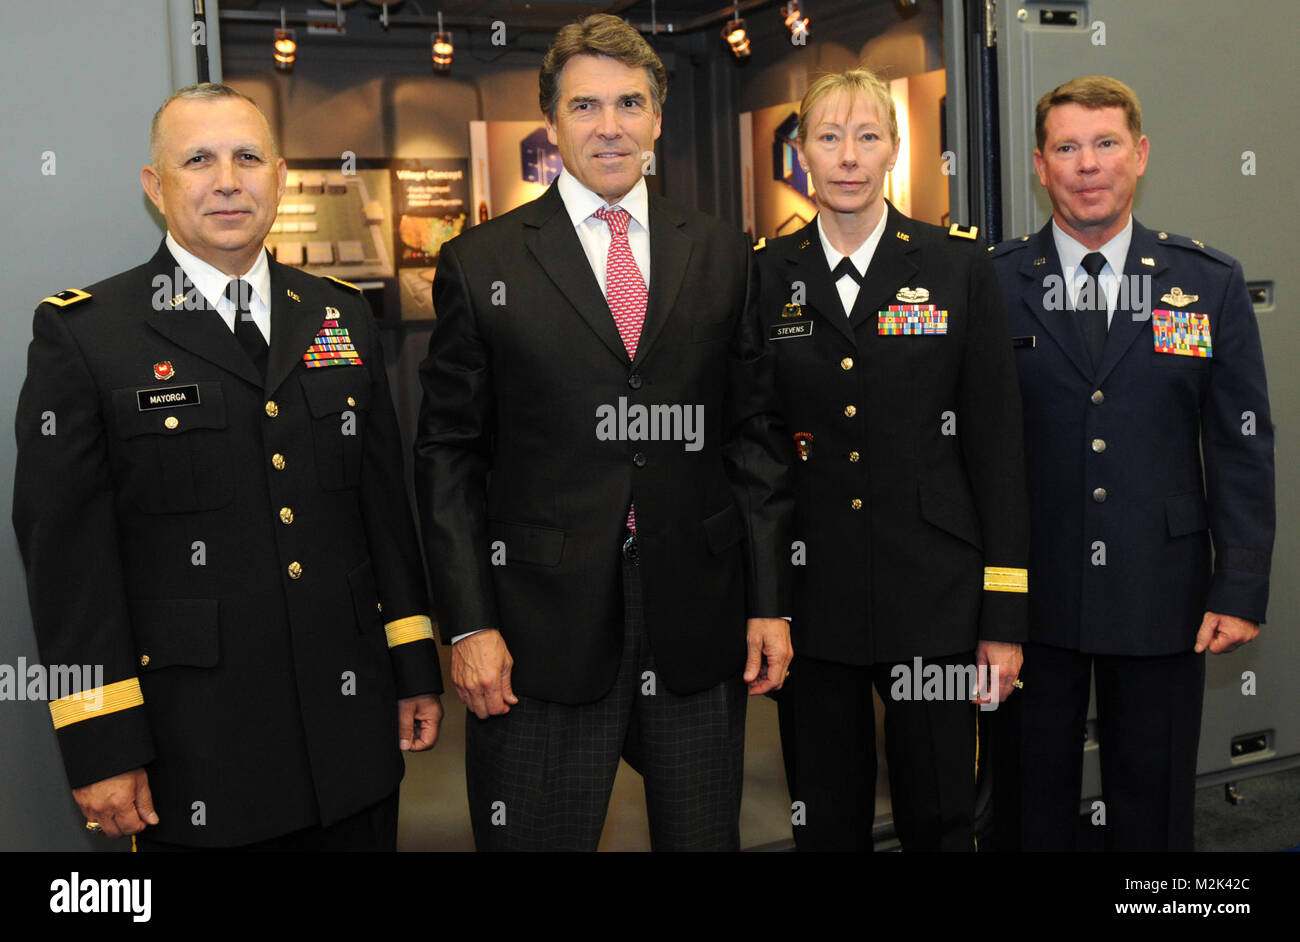 From left to right: Army Maj. Gen Jose S. Mayorga, Army Brig. Gen. Joyce L. Stevens and Air Force Brig. Gen. John F. Nichols join Texas Gov. Rick Perry Aug. 21 at the 132nd National Guard Association of the United States General Conference in Austin, Texas. 100821-A-1403C-007 by Texas Military Department Stock Photo